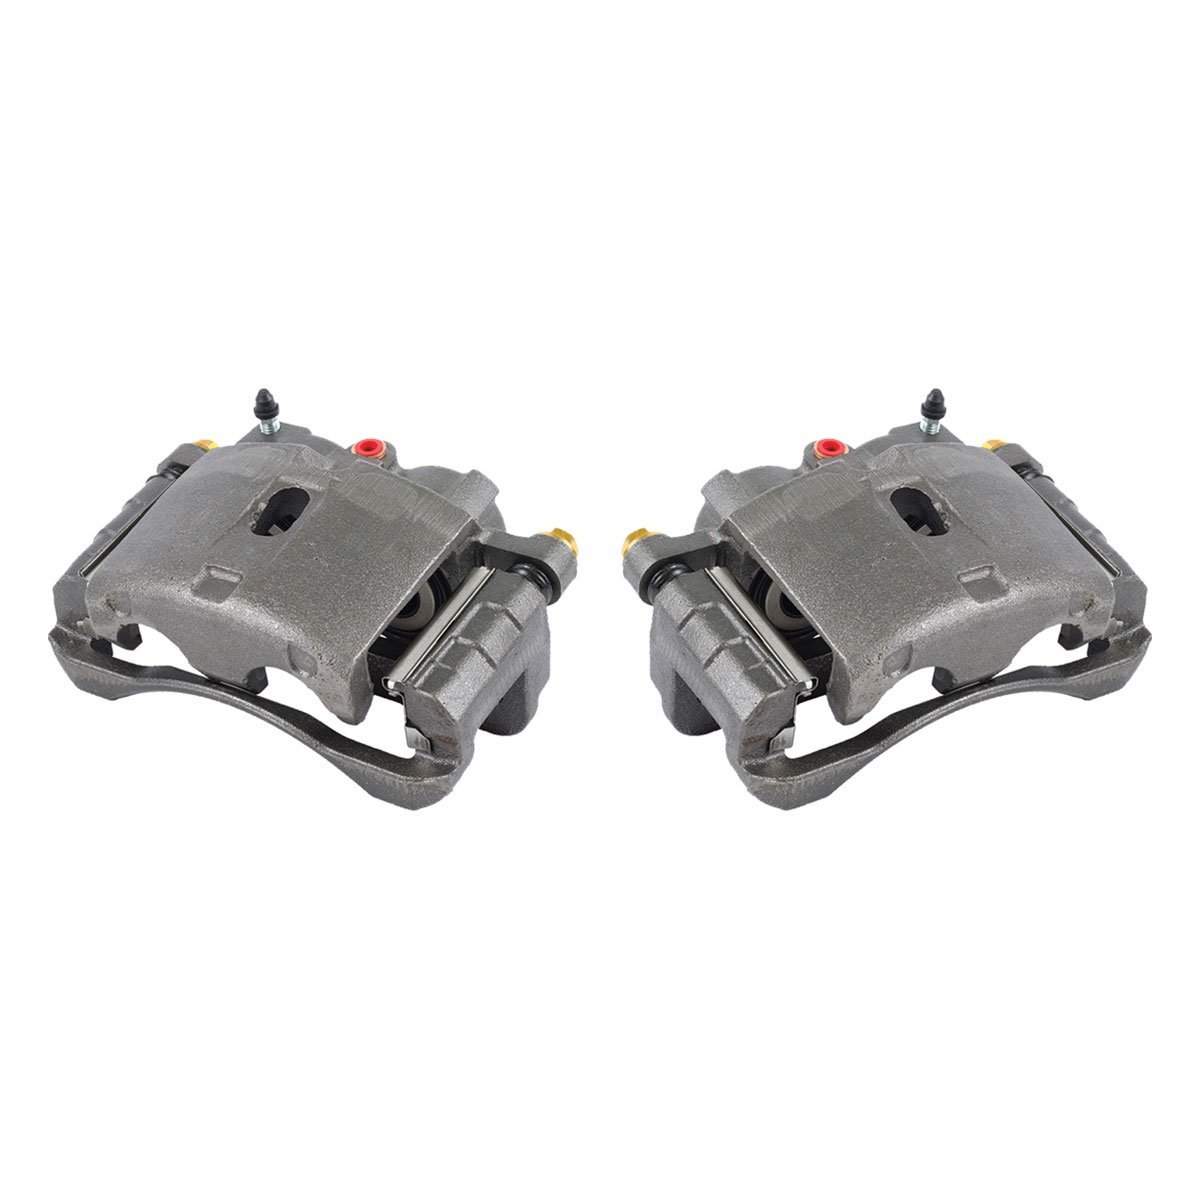 Brake Calipers: Brake More Smoothly and Efficiently